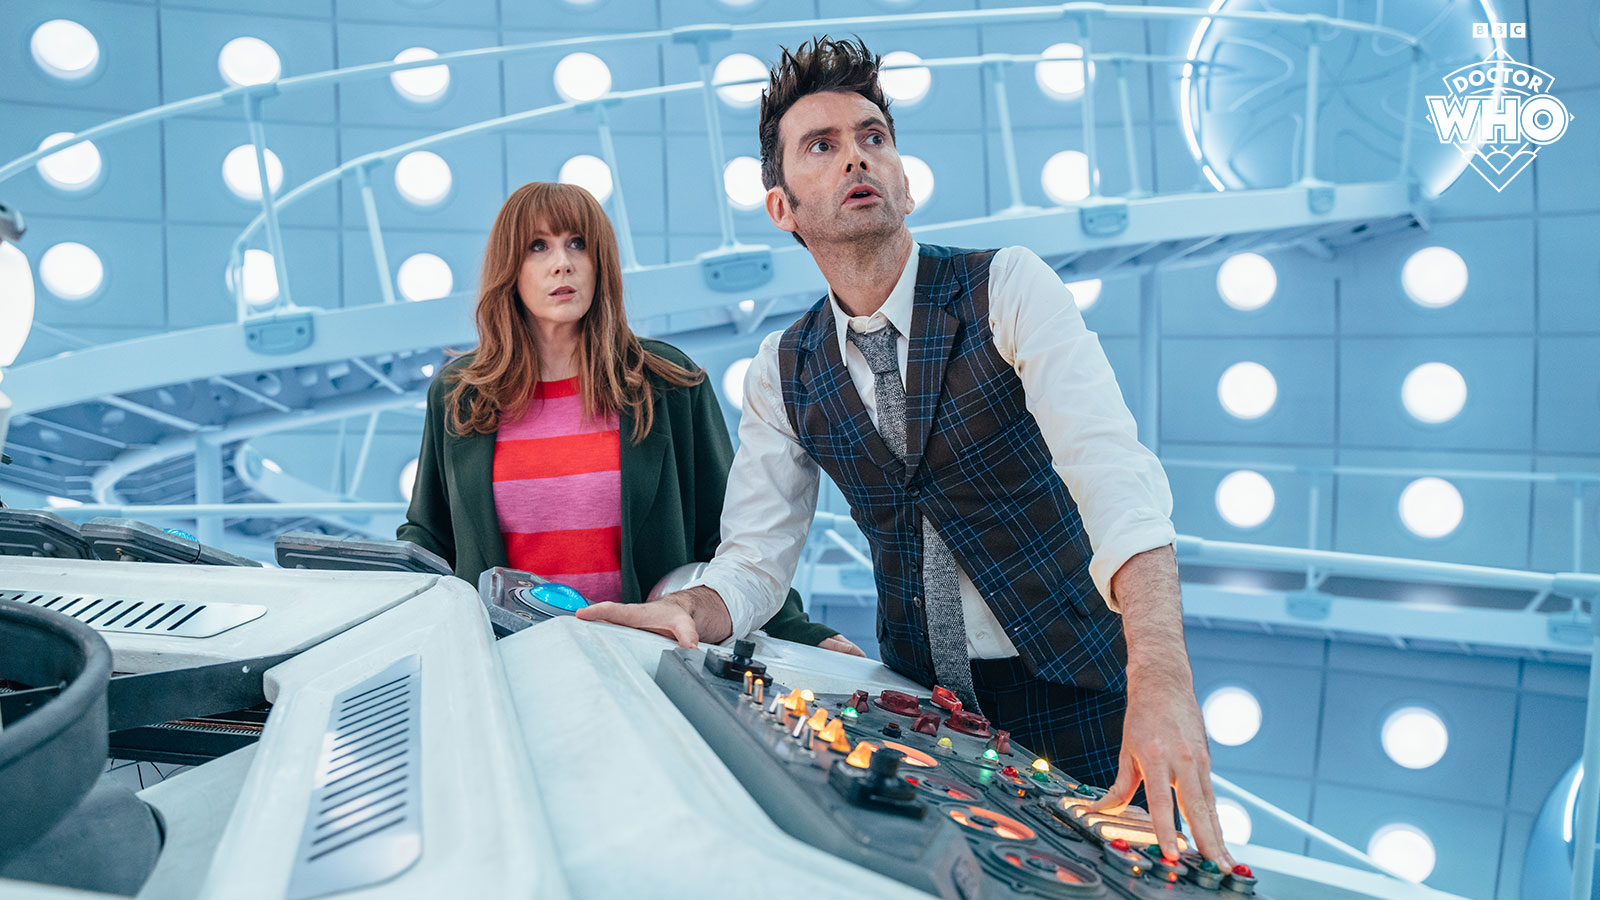 promo photos from Doctor Who featuring David Tennant and Catherine Tate